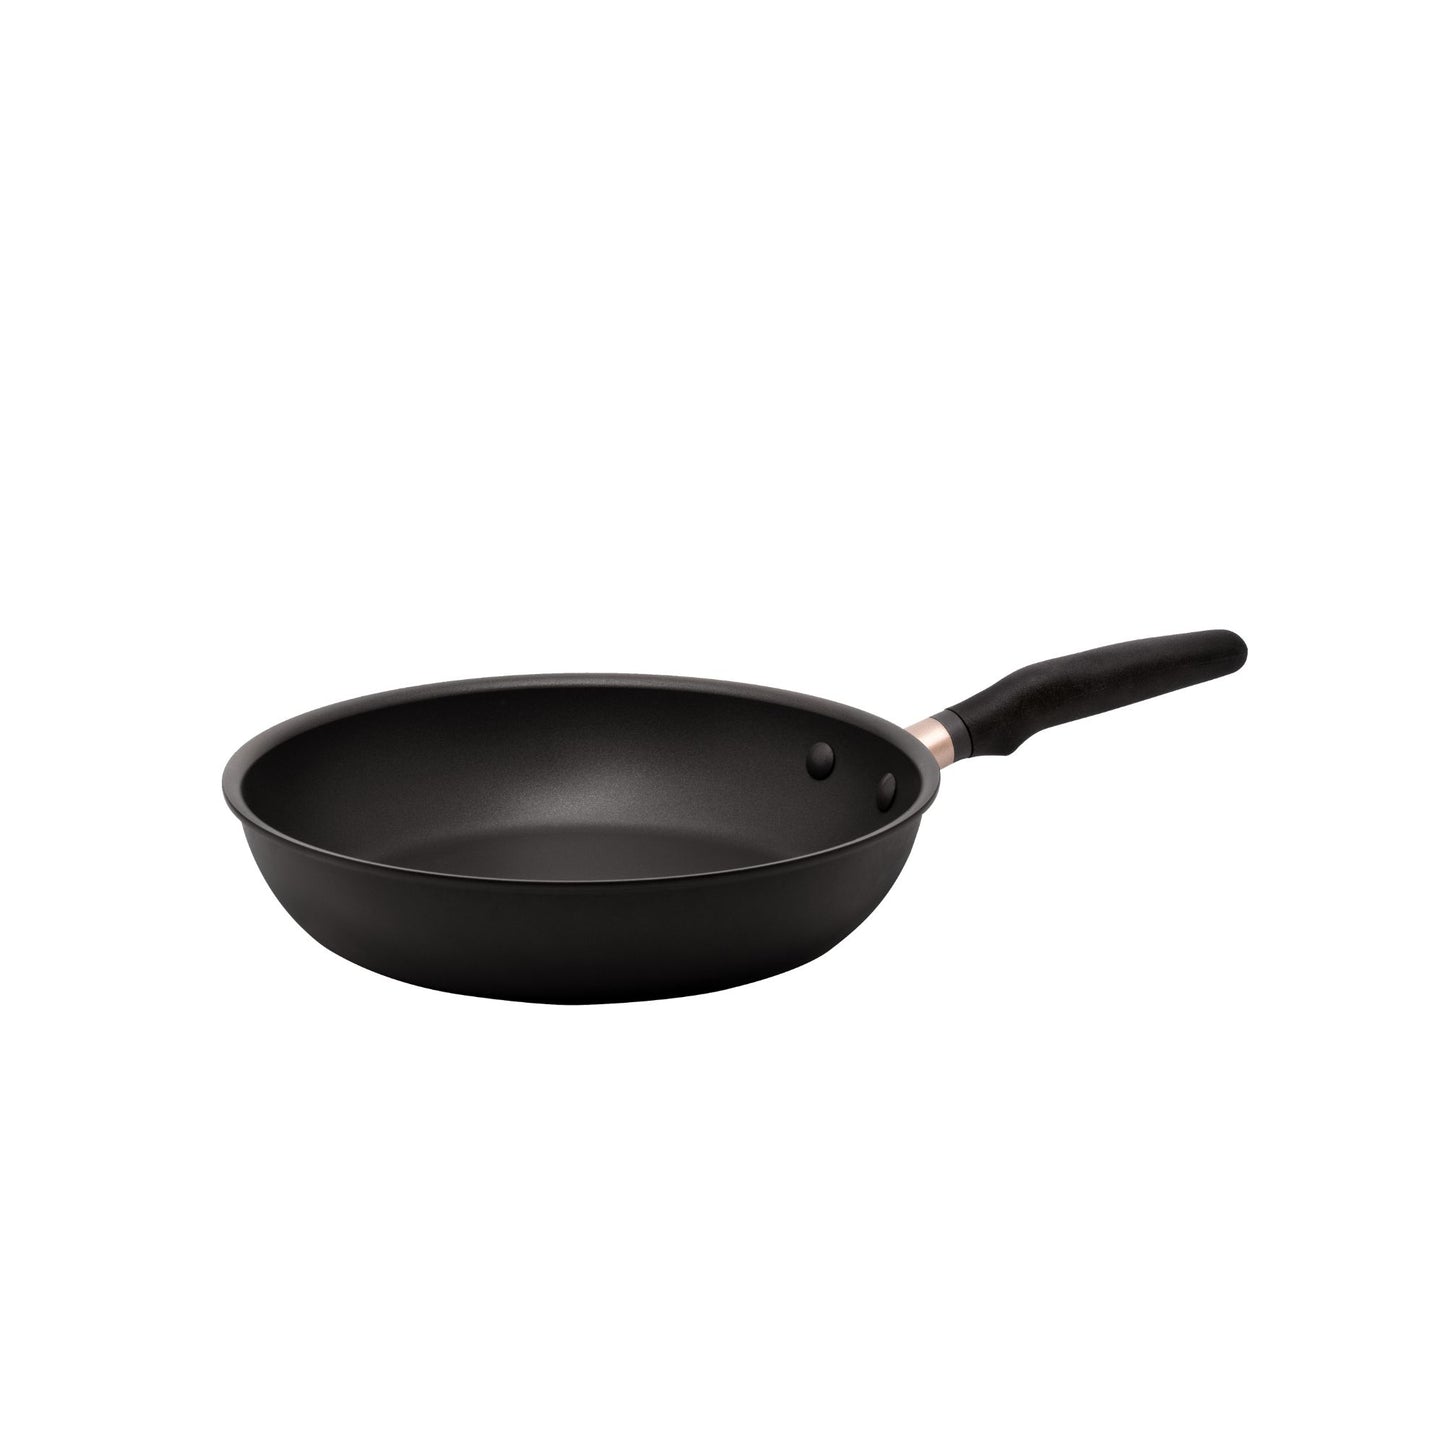 Meyer Accent Series 10.25 Hard Anodized Ultra Durable Nonstick Induction  Frying Pan Matte Black